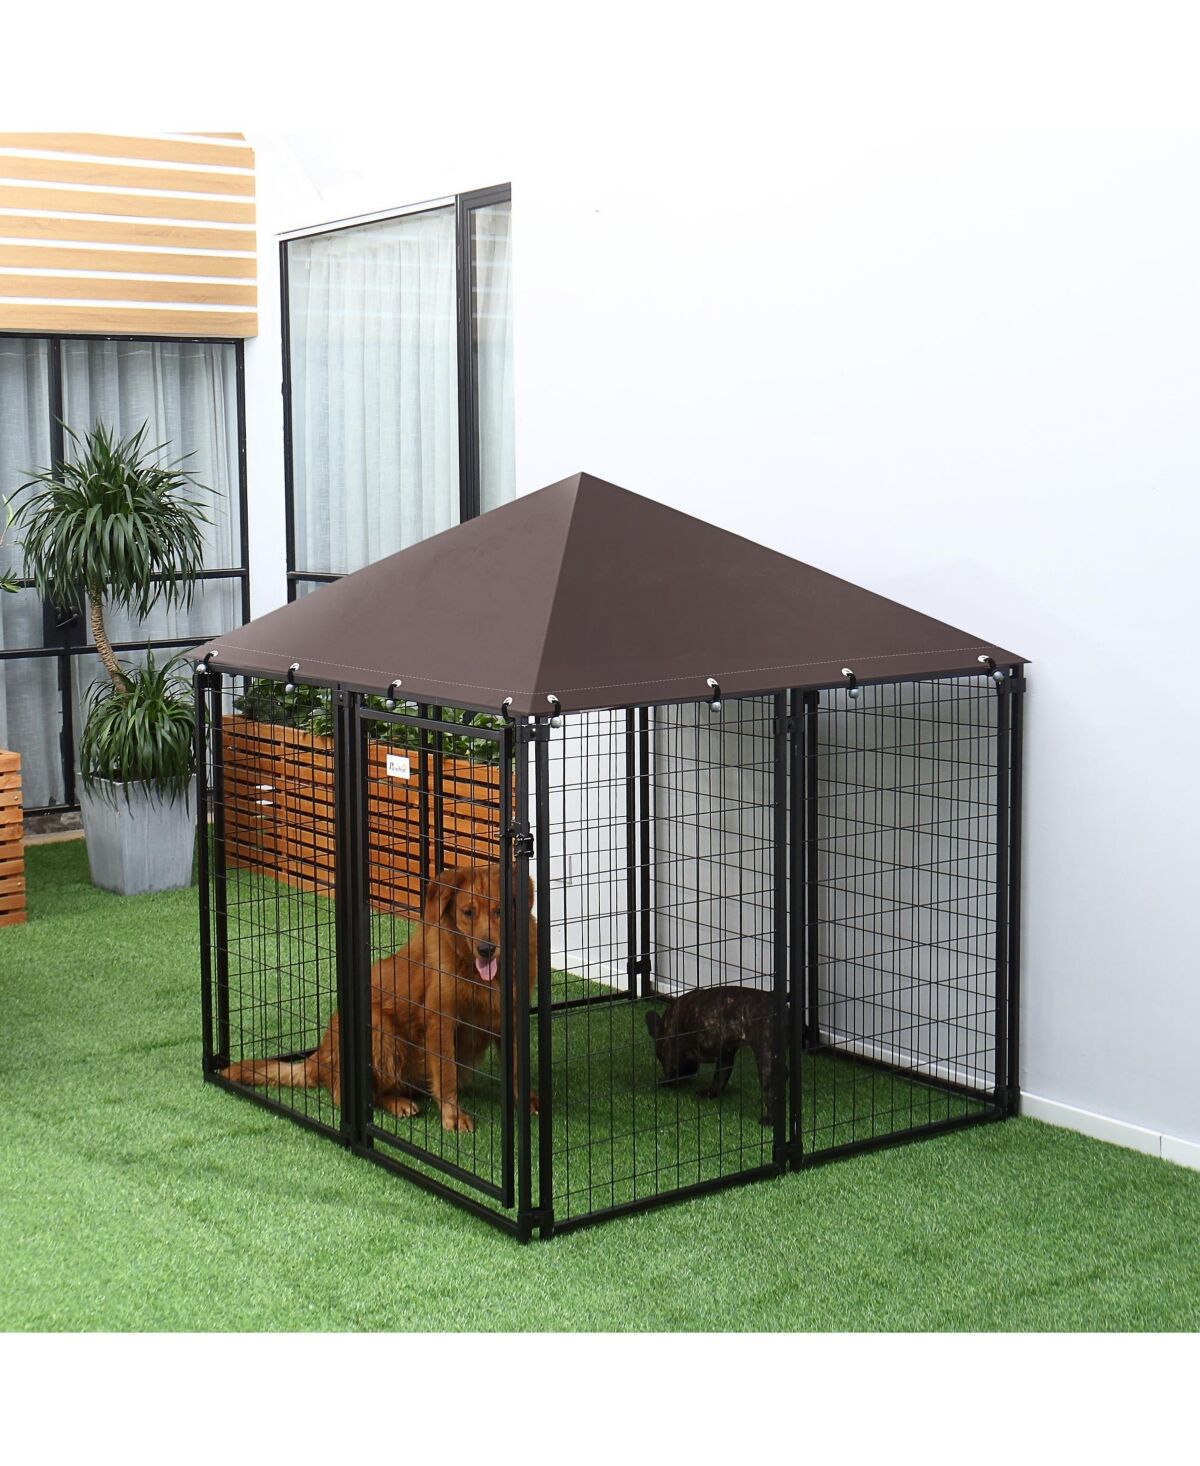 Pawhut Paw Hut Lockable Dog House Kennel with Water-resistant Roof for Small and Medium Sized Pets, 4.6' x 4.6' x 5' - Black